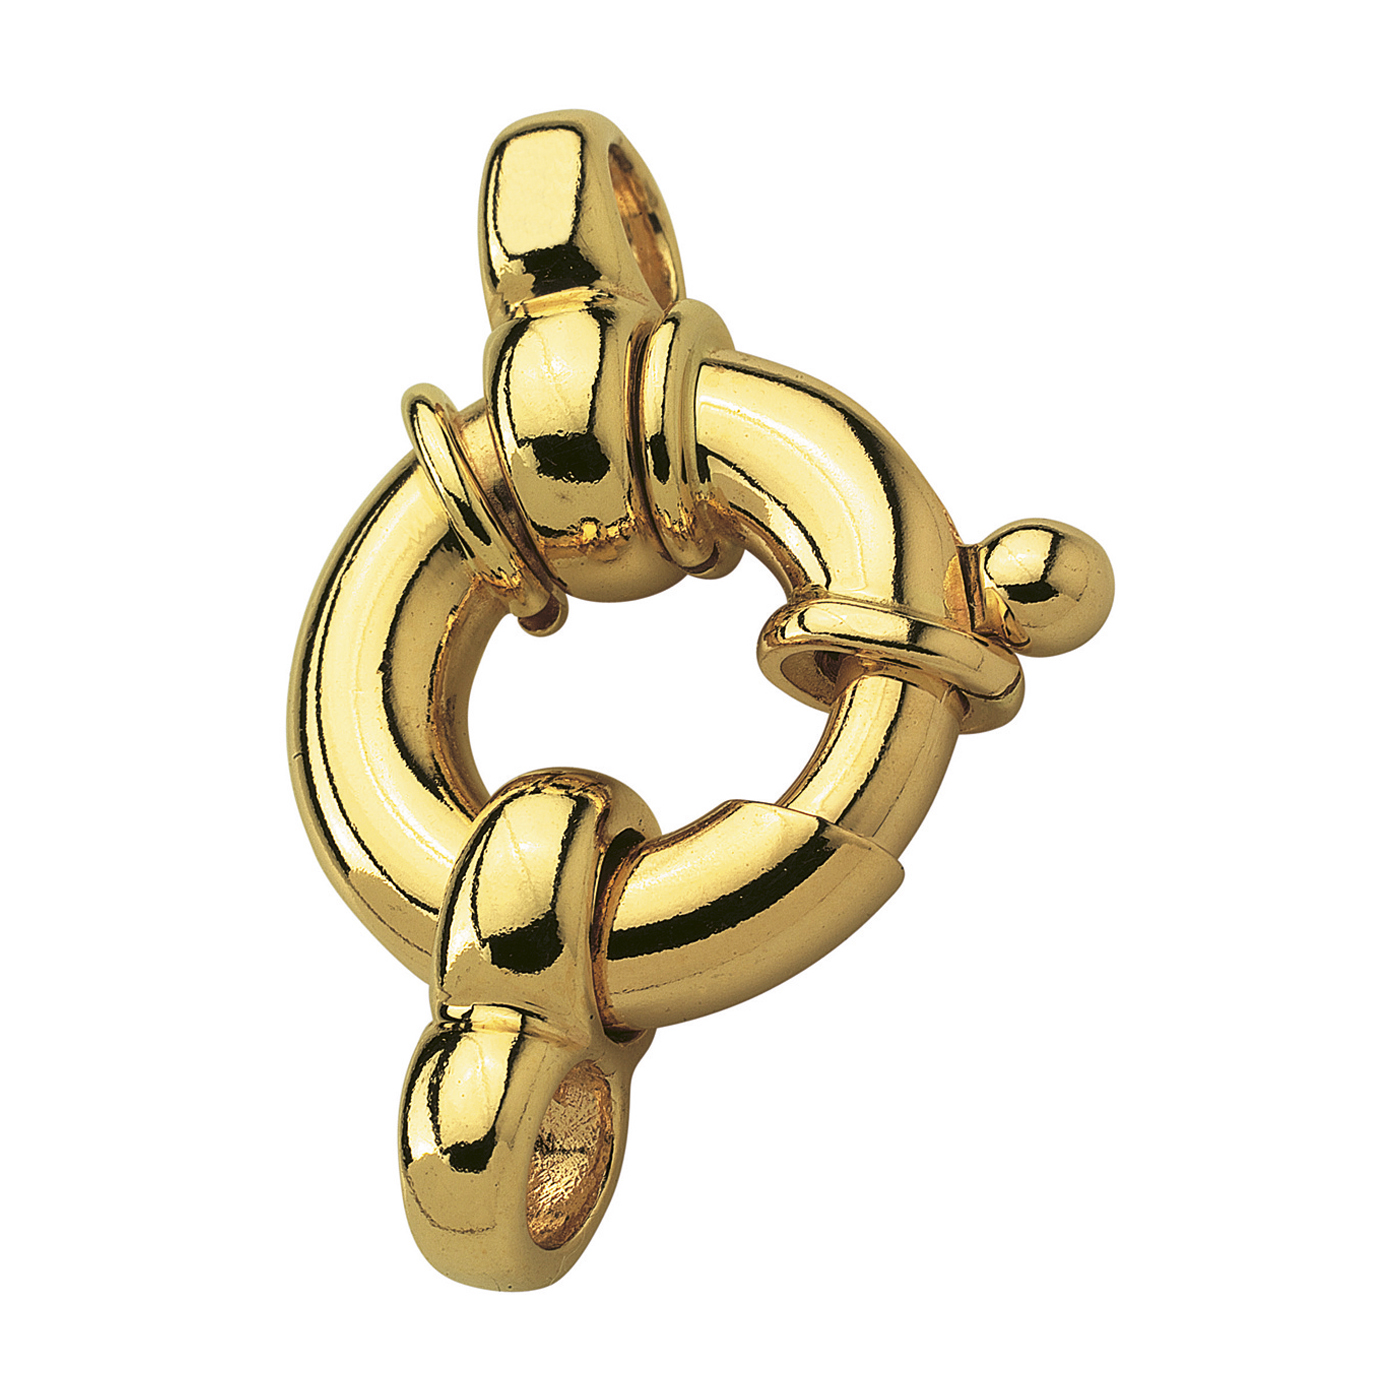 Spring Ring, 750G, ø 15 mm, with Trigger Lugs - 1 piece